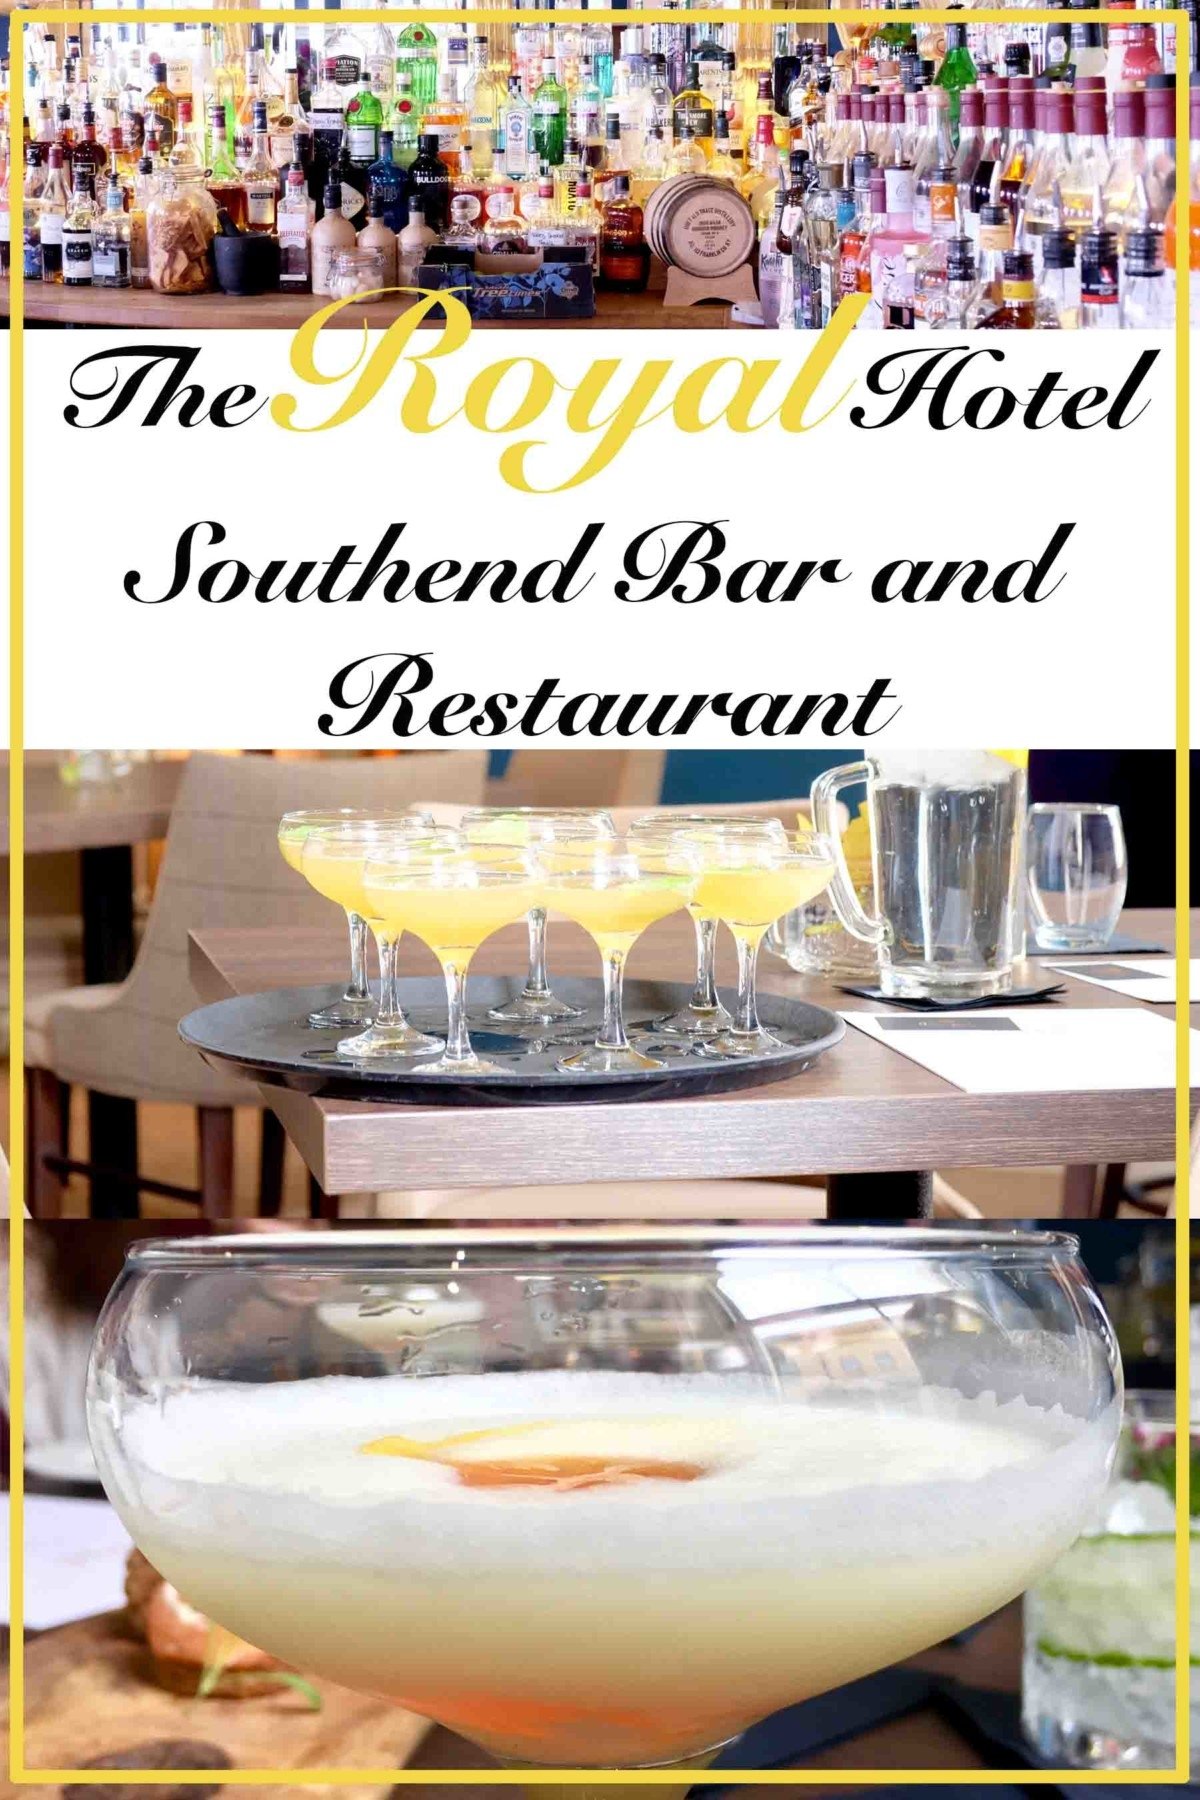 The Royal Hotel Southend Bar and restaurant pin